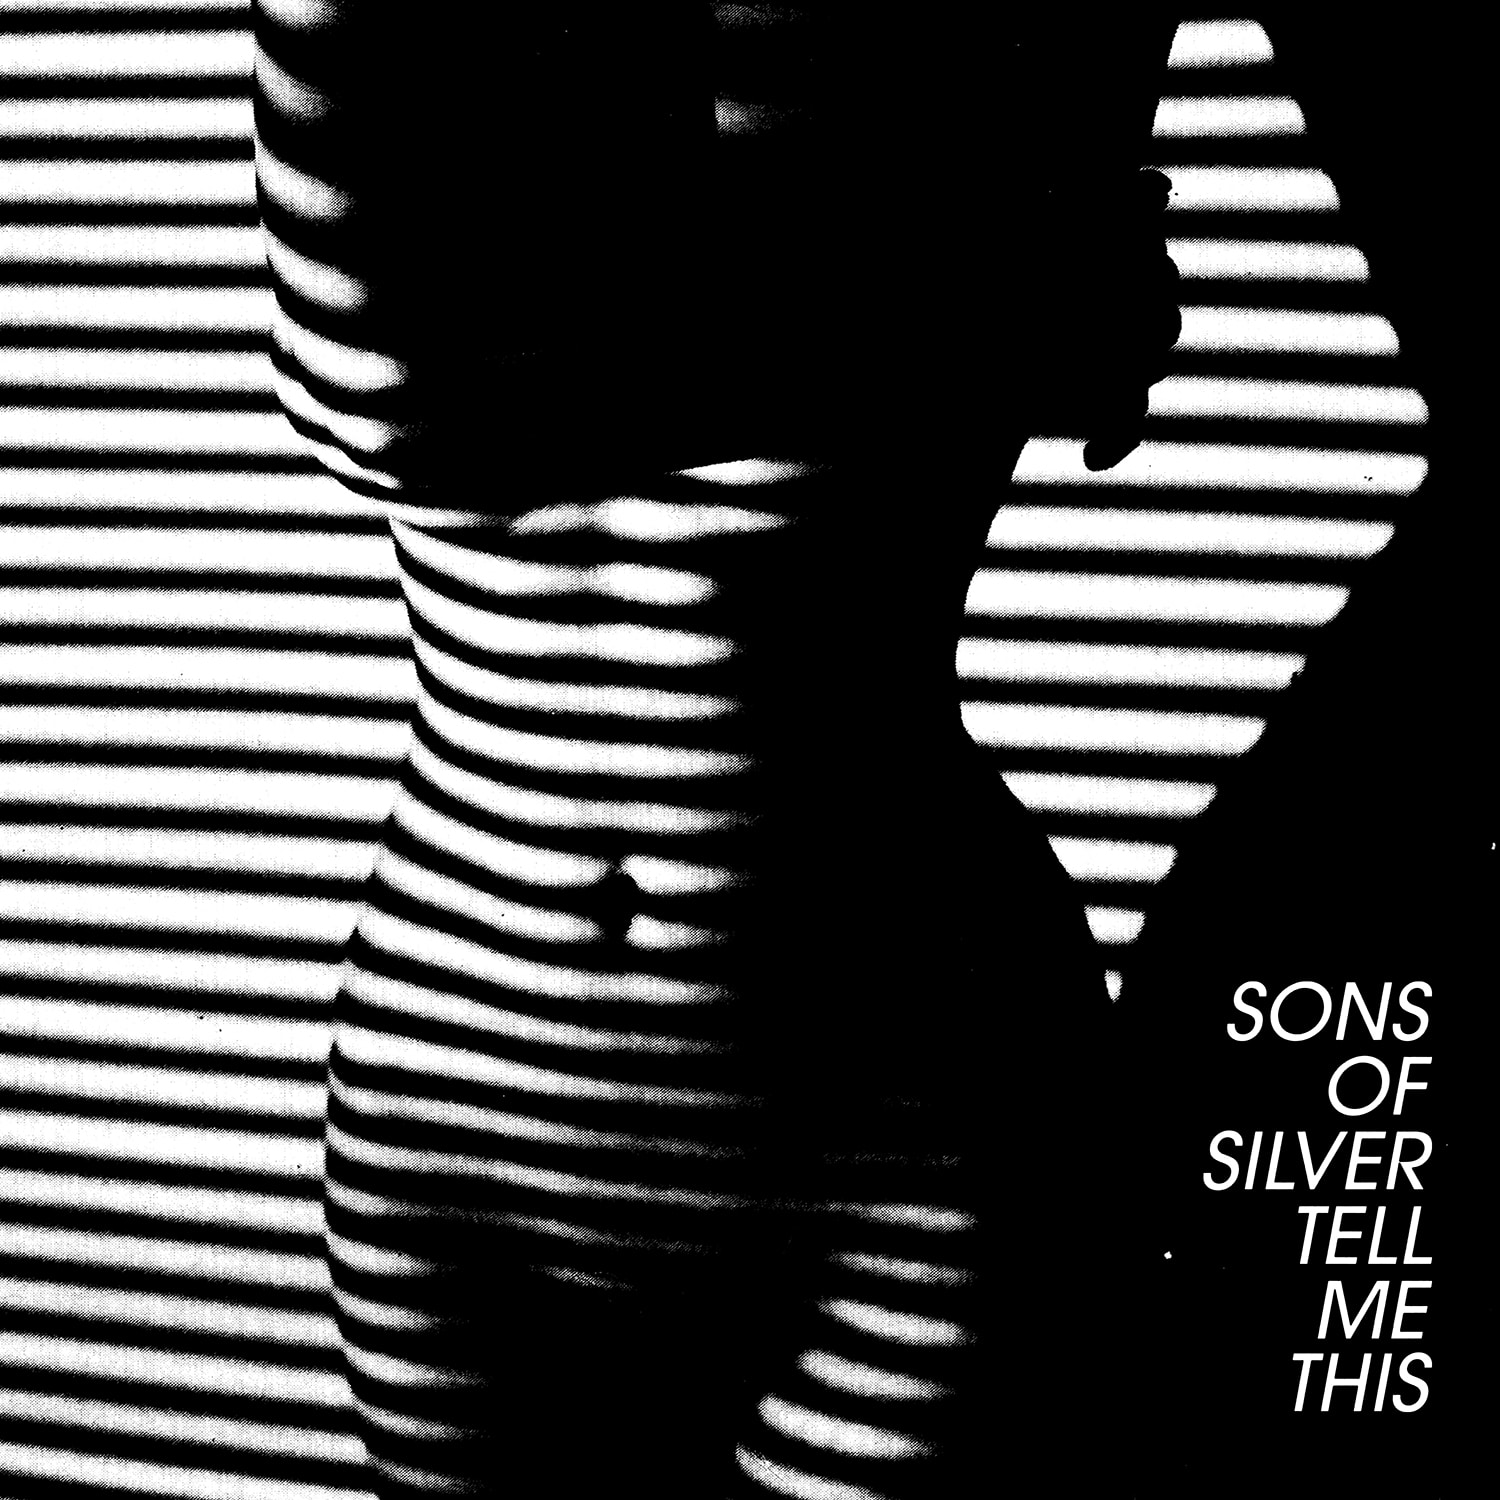 Sons of Silver Band - Runaway Emotions Album Cover, Peter Argyropoulos - Vocalist and Guitarist, Marc Slutsky - Drummer of Sons of Silver, Brina Kabler - Keyboardist and Engineer, Kevin Haaland - Guitarist (Skillet), Adam Kury - Bassist (Candlebox), Behind The Song Visualizer - Tell Me This, Sons of Silver - Doomsday Noises EP Cover, Sons of Silver - Ordinary Sex Appeal EP Cover, Tim Palmer - Renowned Music Producer/Engineer